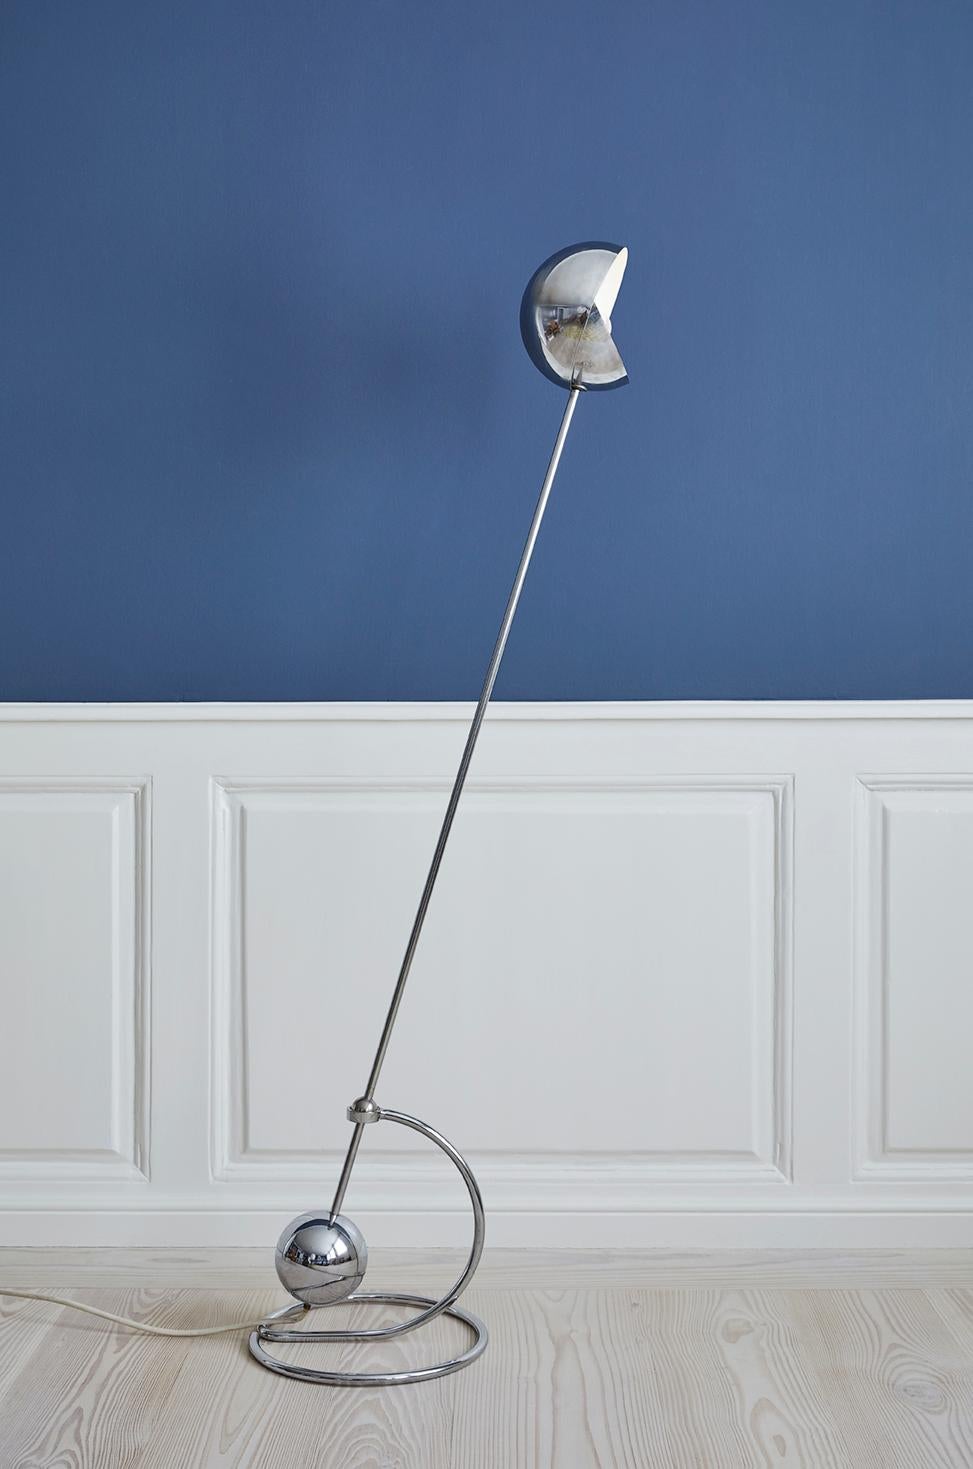 A rare adjustable 3S floor lamp designed by Paolo Tilche in 1972, produced by Sirrah, Bologna. 

The large, chrome-plated metal counter weight keeps the long arm perfectly balanced in the tubular base. The two hemispherical shades on the other end